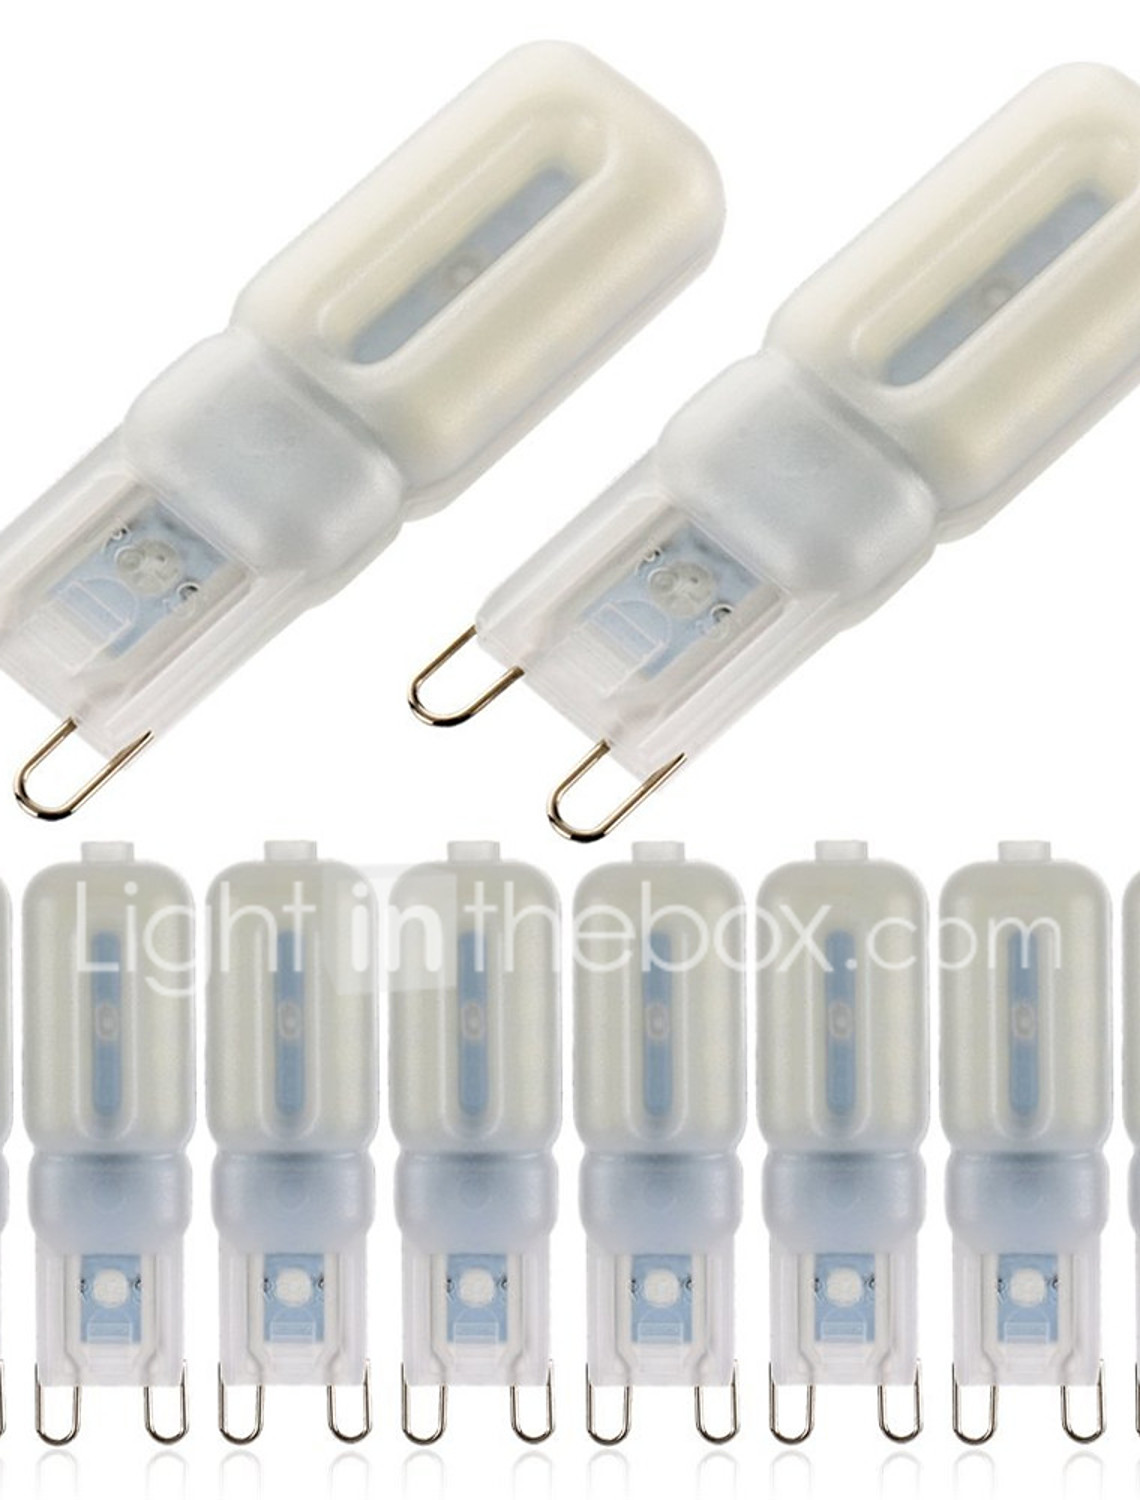 Light Bulbs E11 Dimmable 4W 152 LED 3014 SMD 300-400 LM Warm White Cool White Decorative Bi-pin Lights AC 110-130V 1PCS Size : Cold White Equivalent 